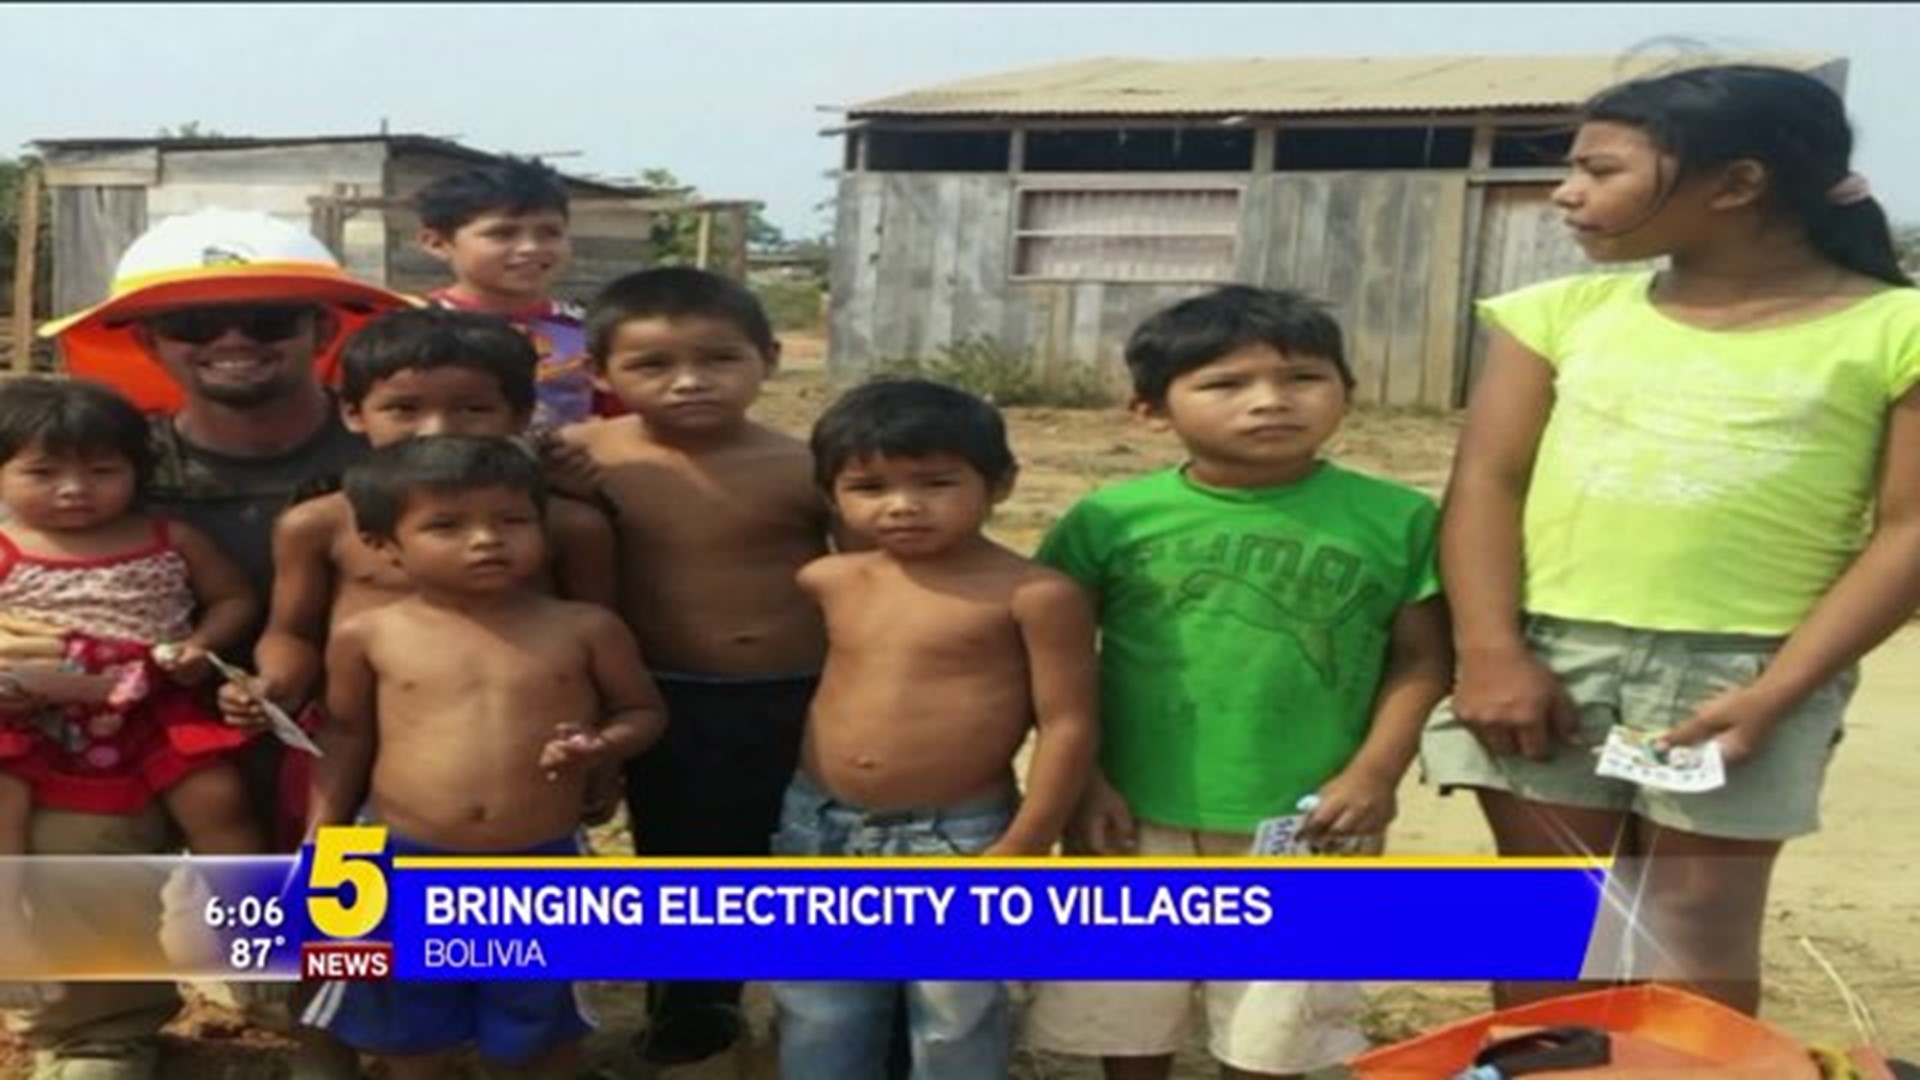 Volunteers Bring Electricity To Bolivia Villages